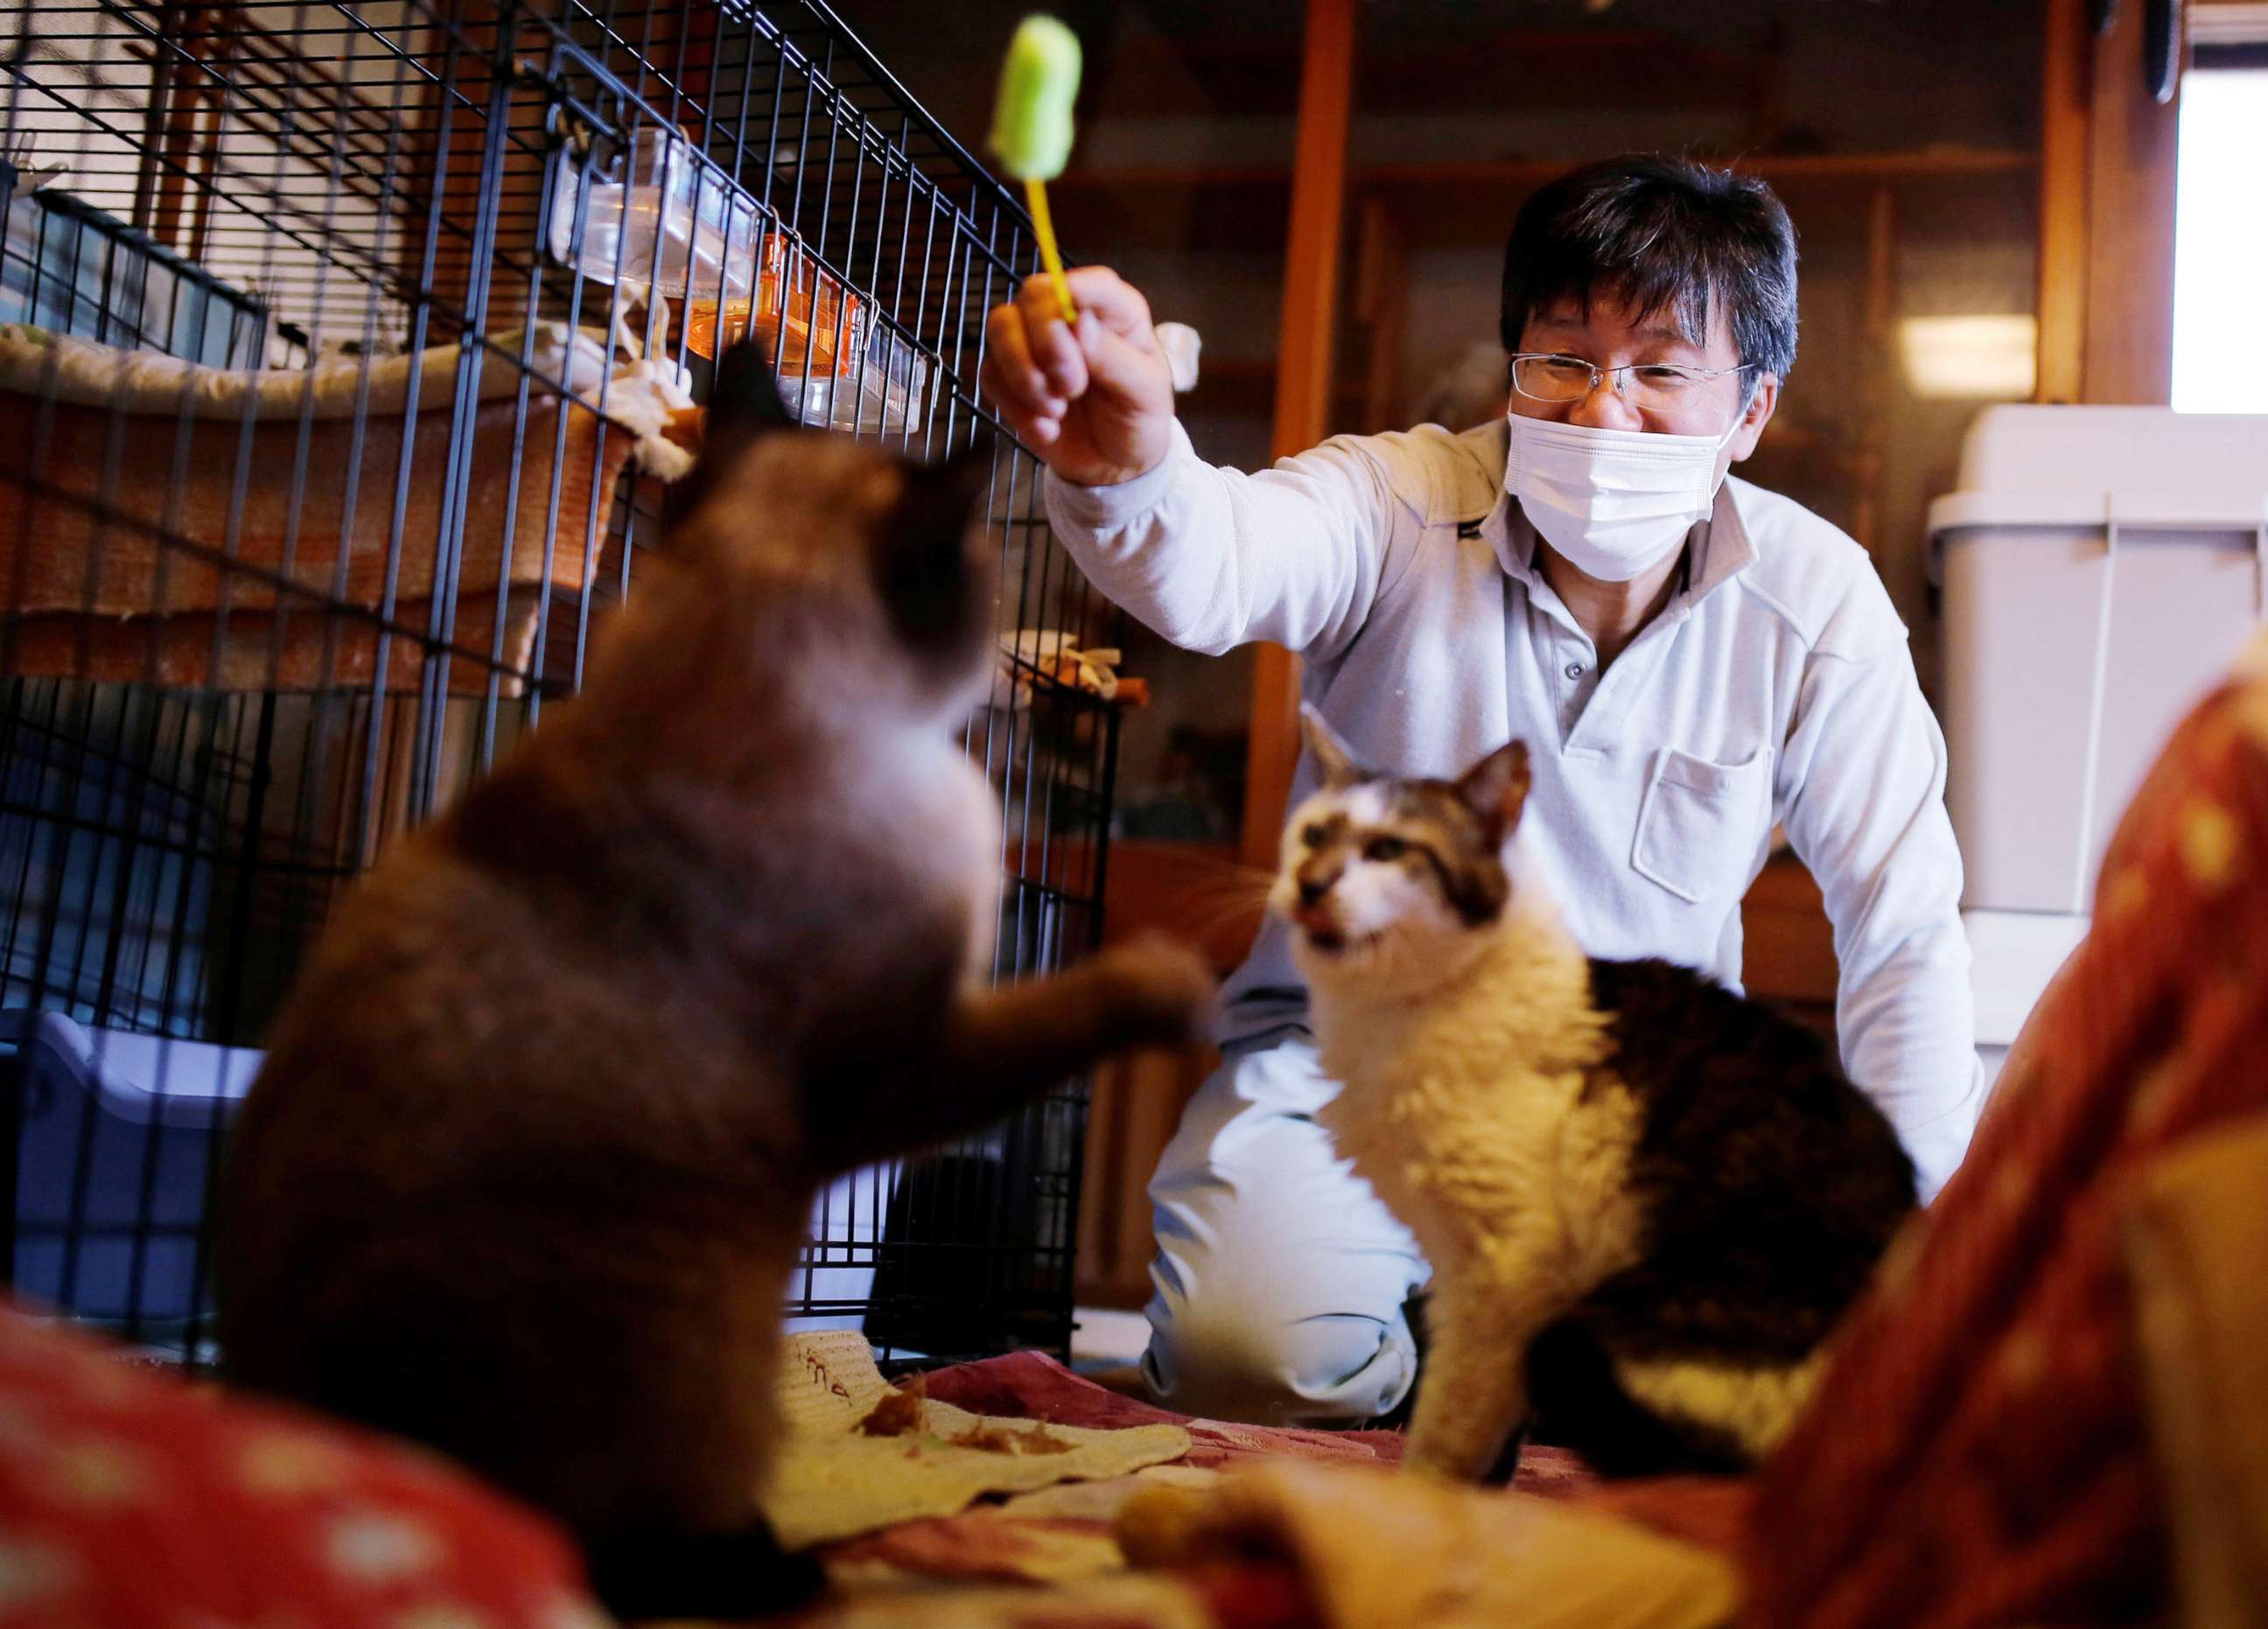 PHOTO: Sakae Kato plays with cats that he rescued, called Mokkun and Charm, who are both infected with feline leukemia virus, at his home, in a restricted zone in Namie, Fukushima Prefecture, Japan, Feb. 20, 2021.